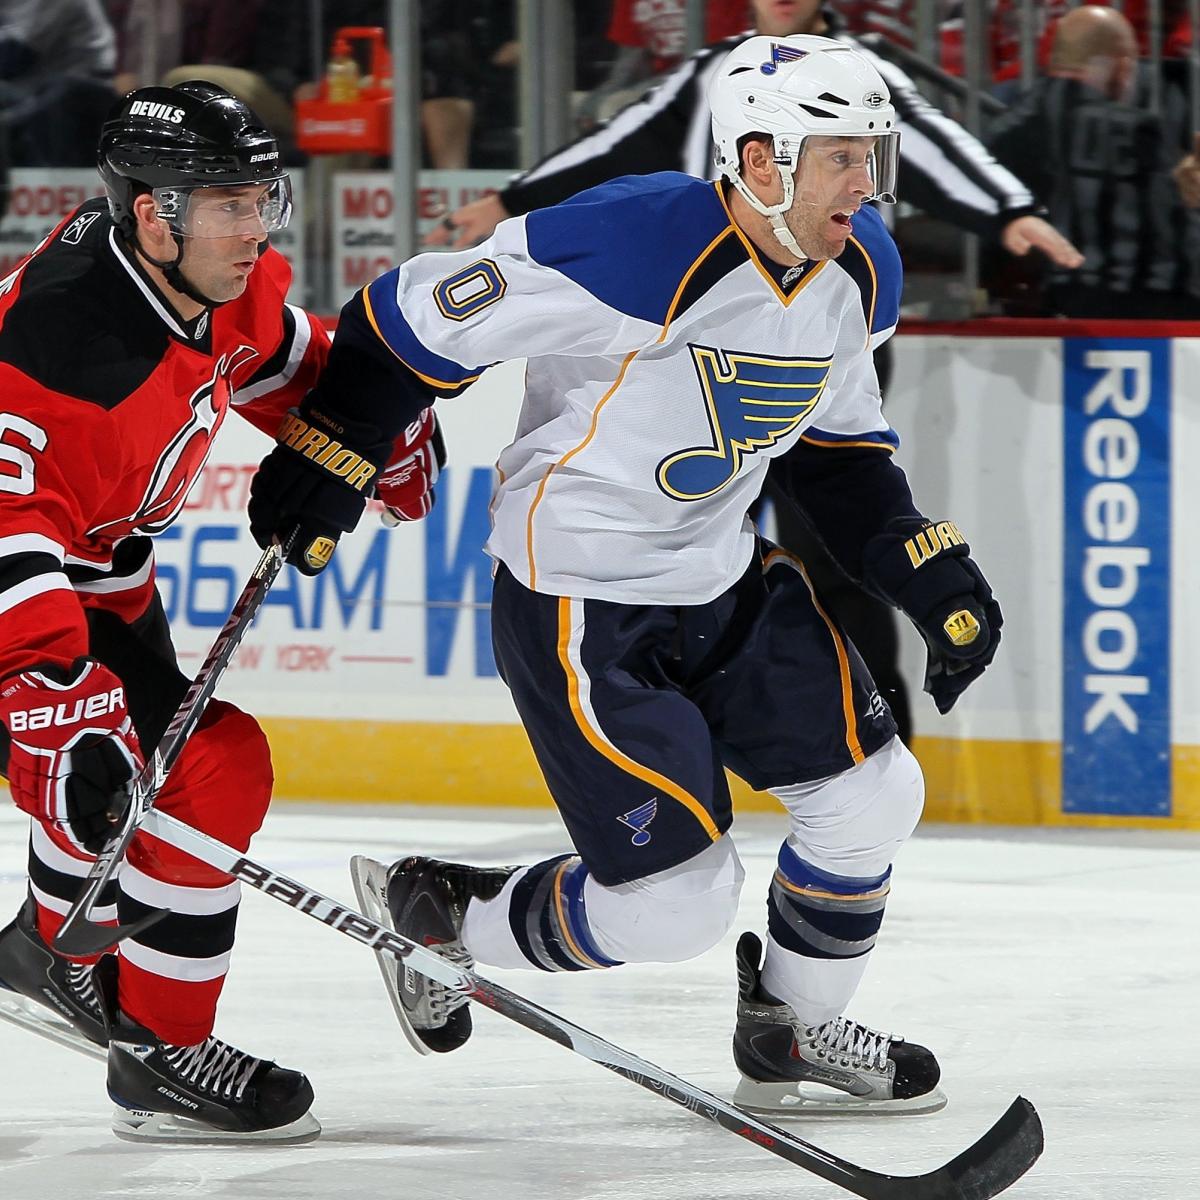 Game Preview #56: New Jersey Devils vs. St. Louis Blues - All